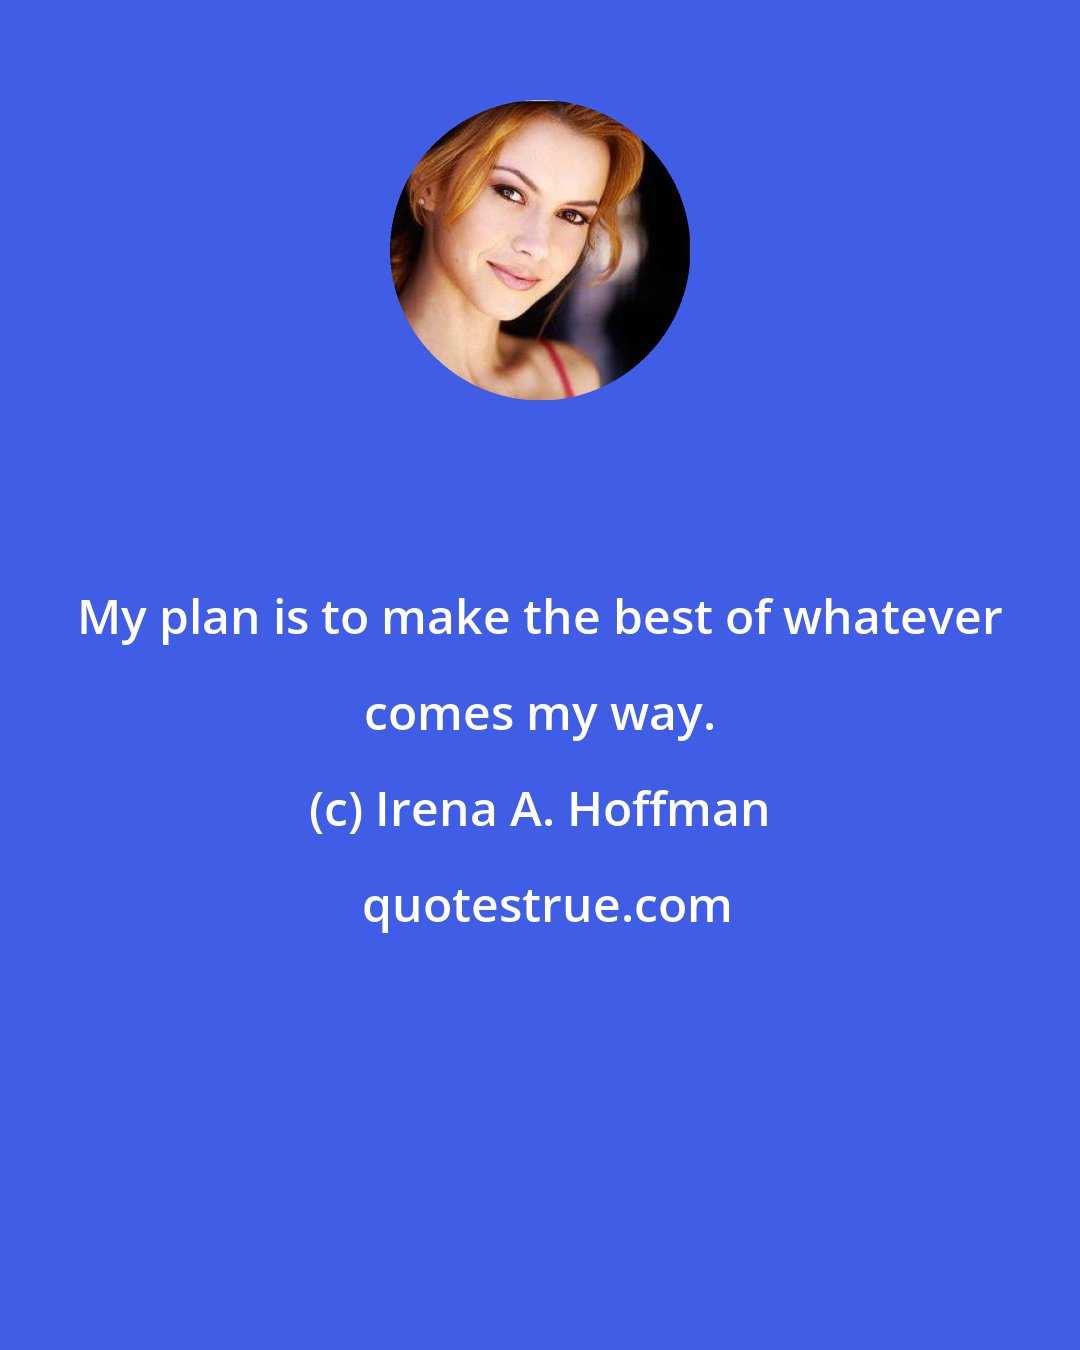 Irena A. Hoffman: My plan is to make the best of whatever comes my way.